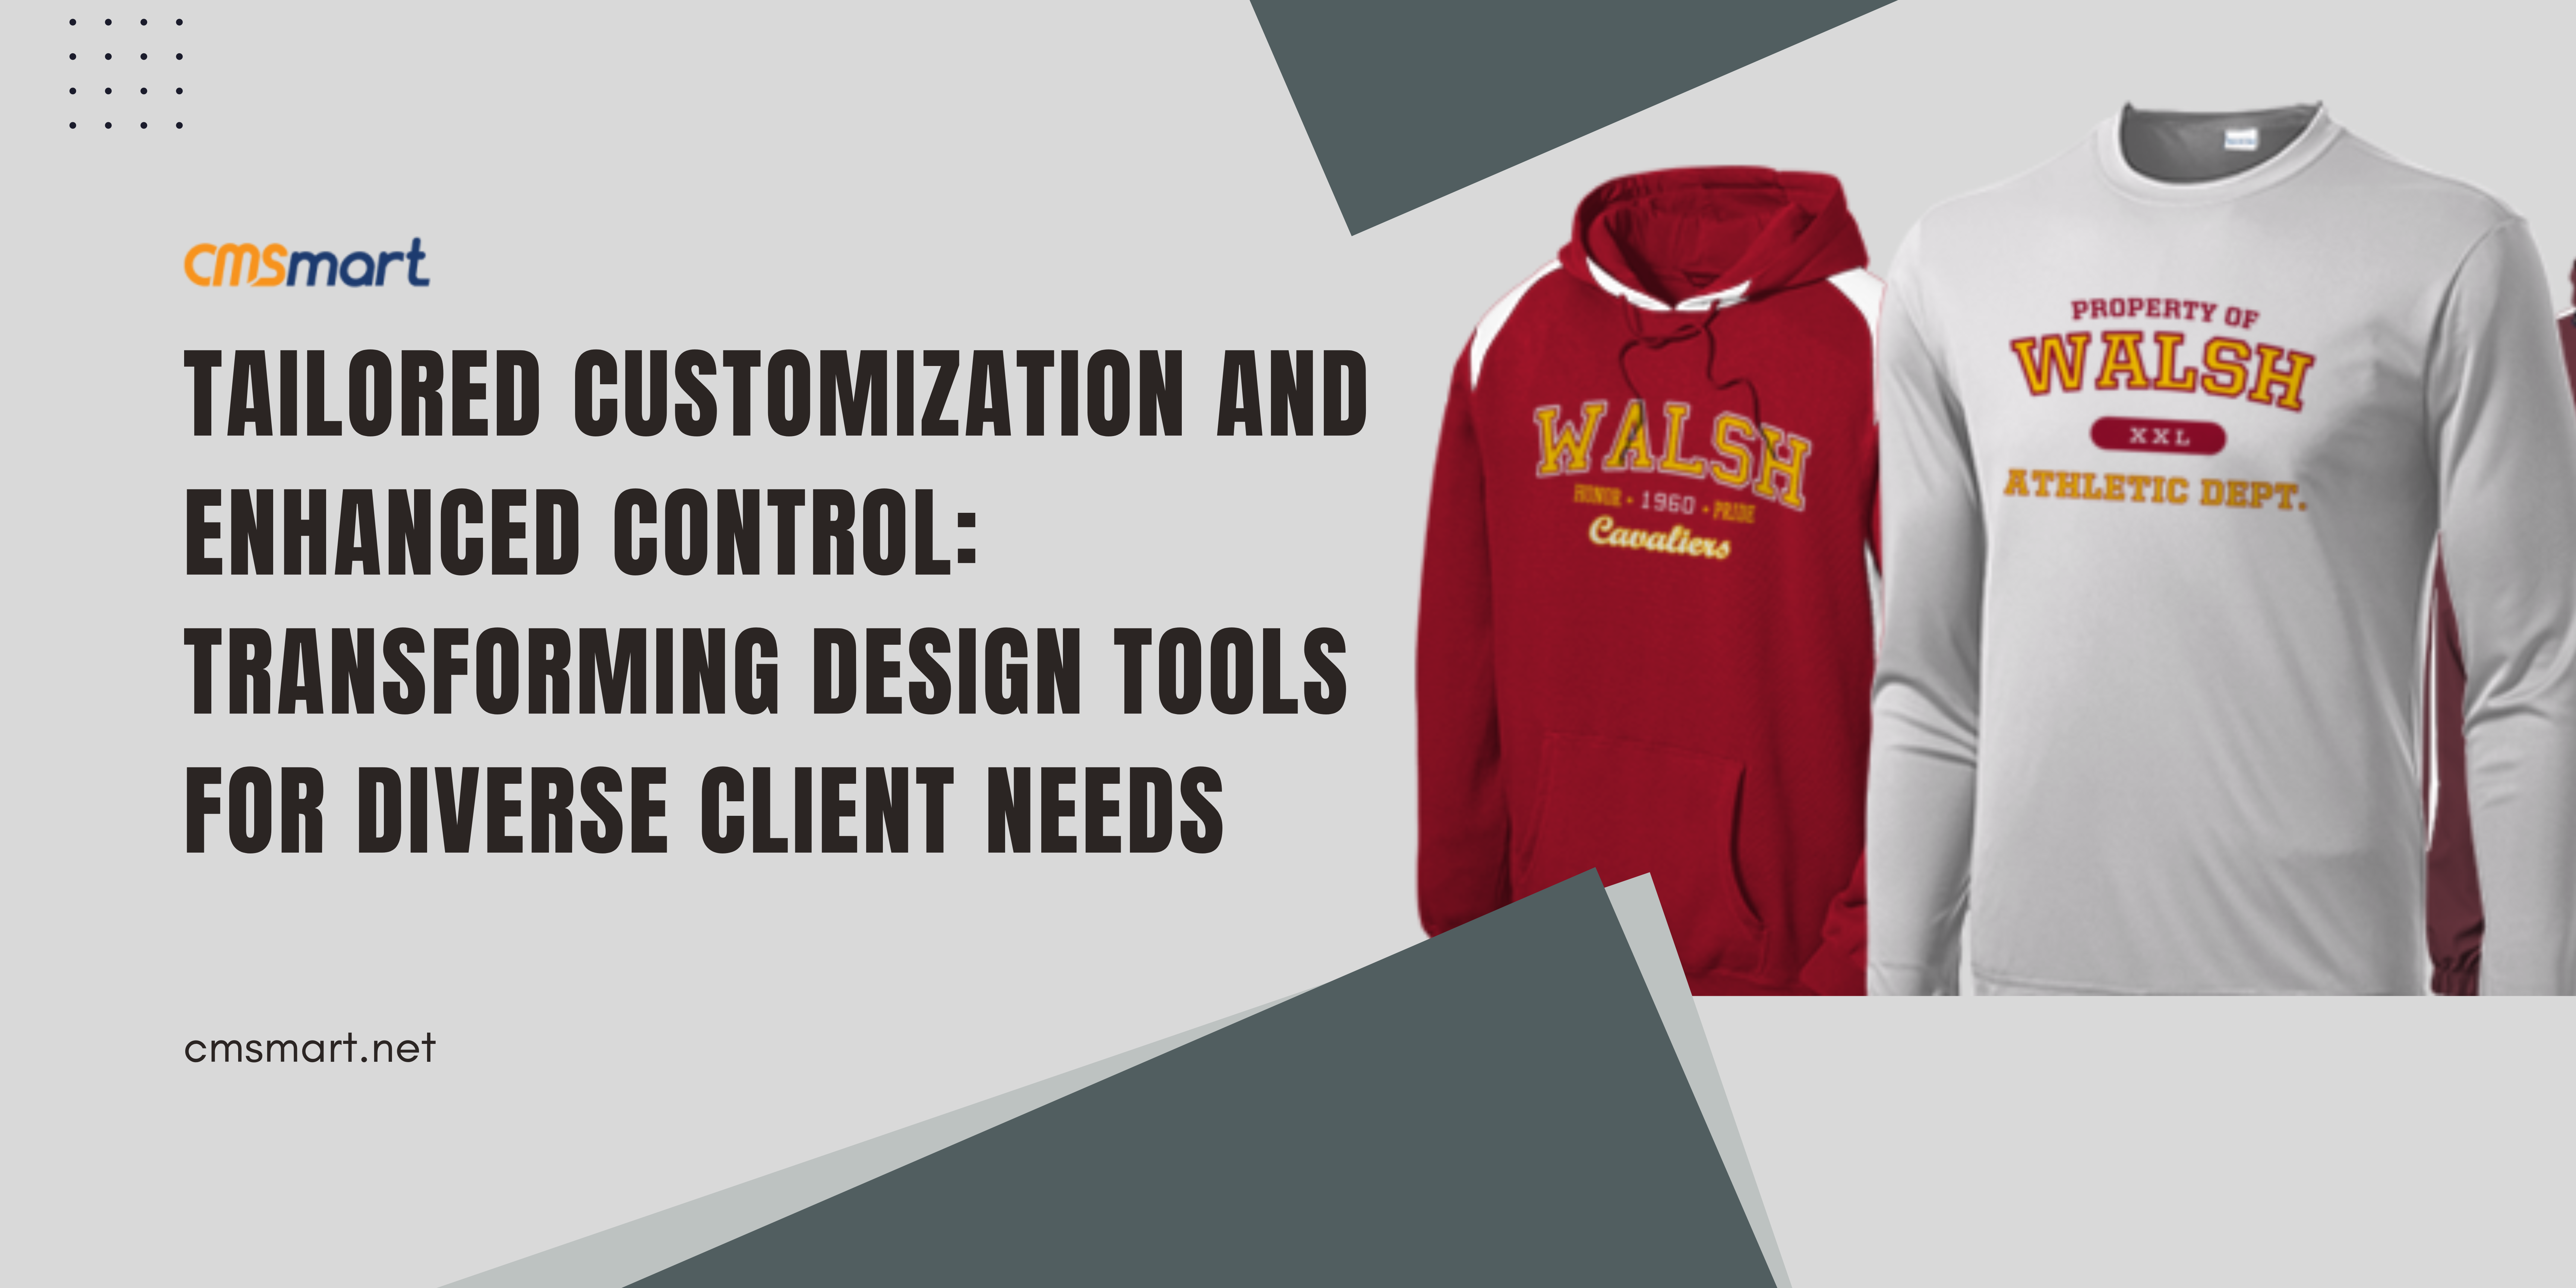 Tailored Customization and Enhanced Control: Transforming Design Tools for Diverse Client Needs